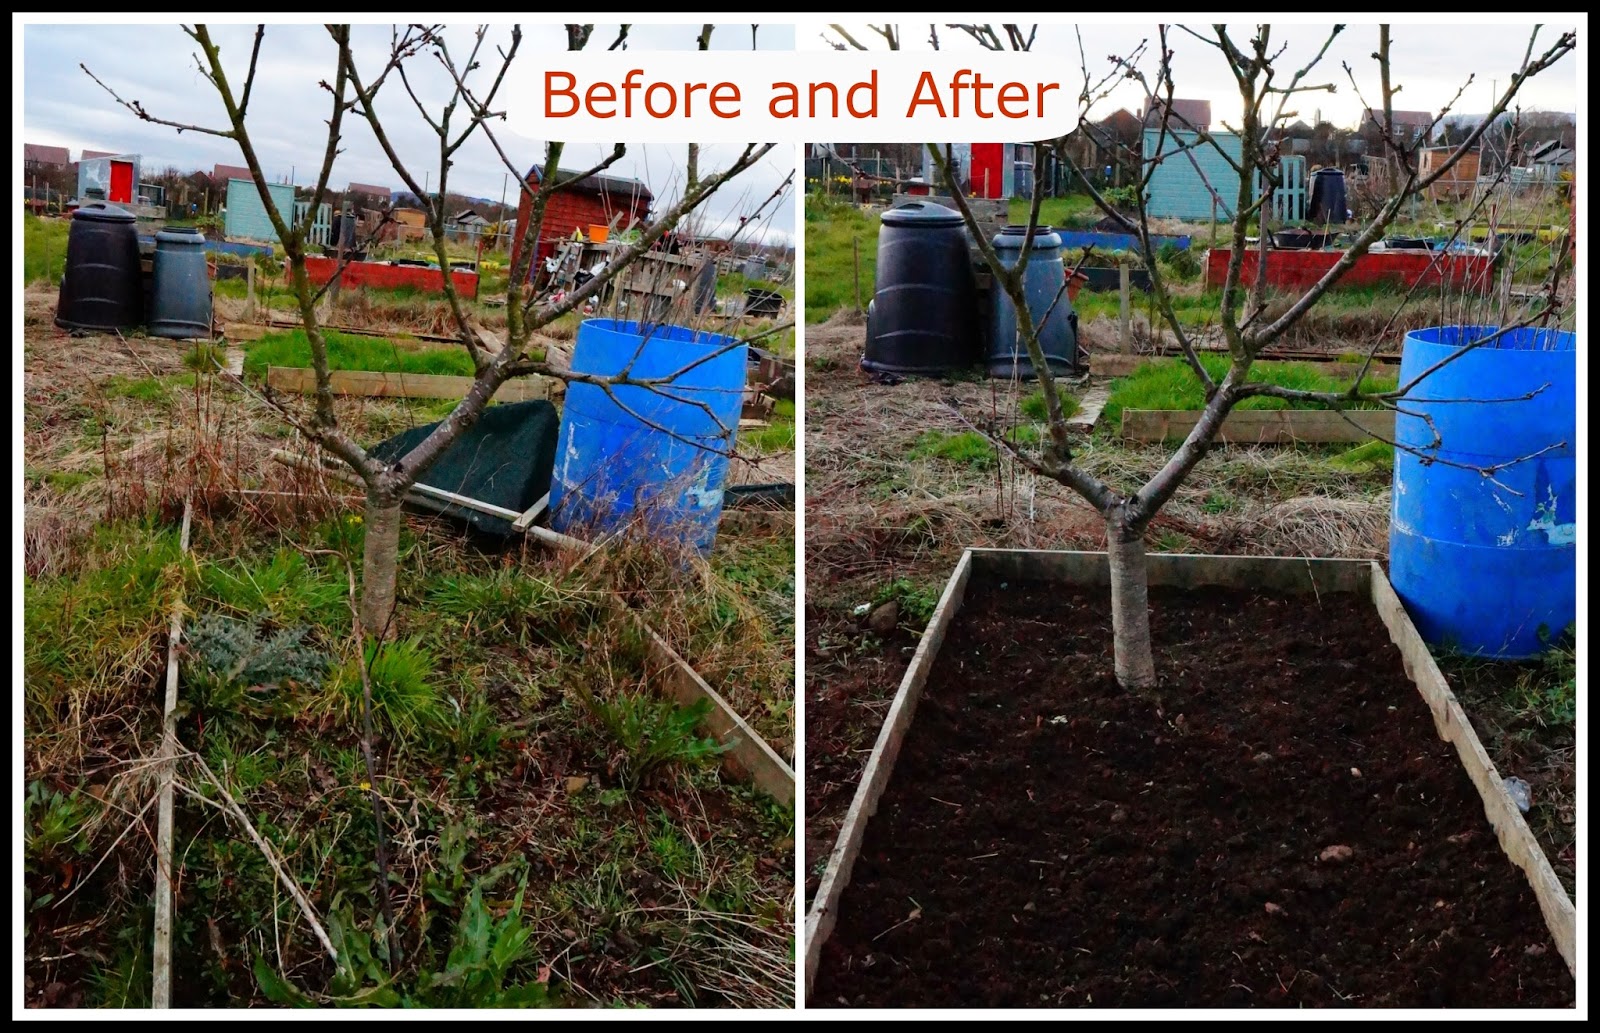 cherry tree bed, before and after- 'growourown.blogspot.com' ~ allotment blog